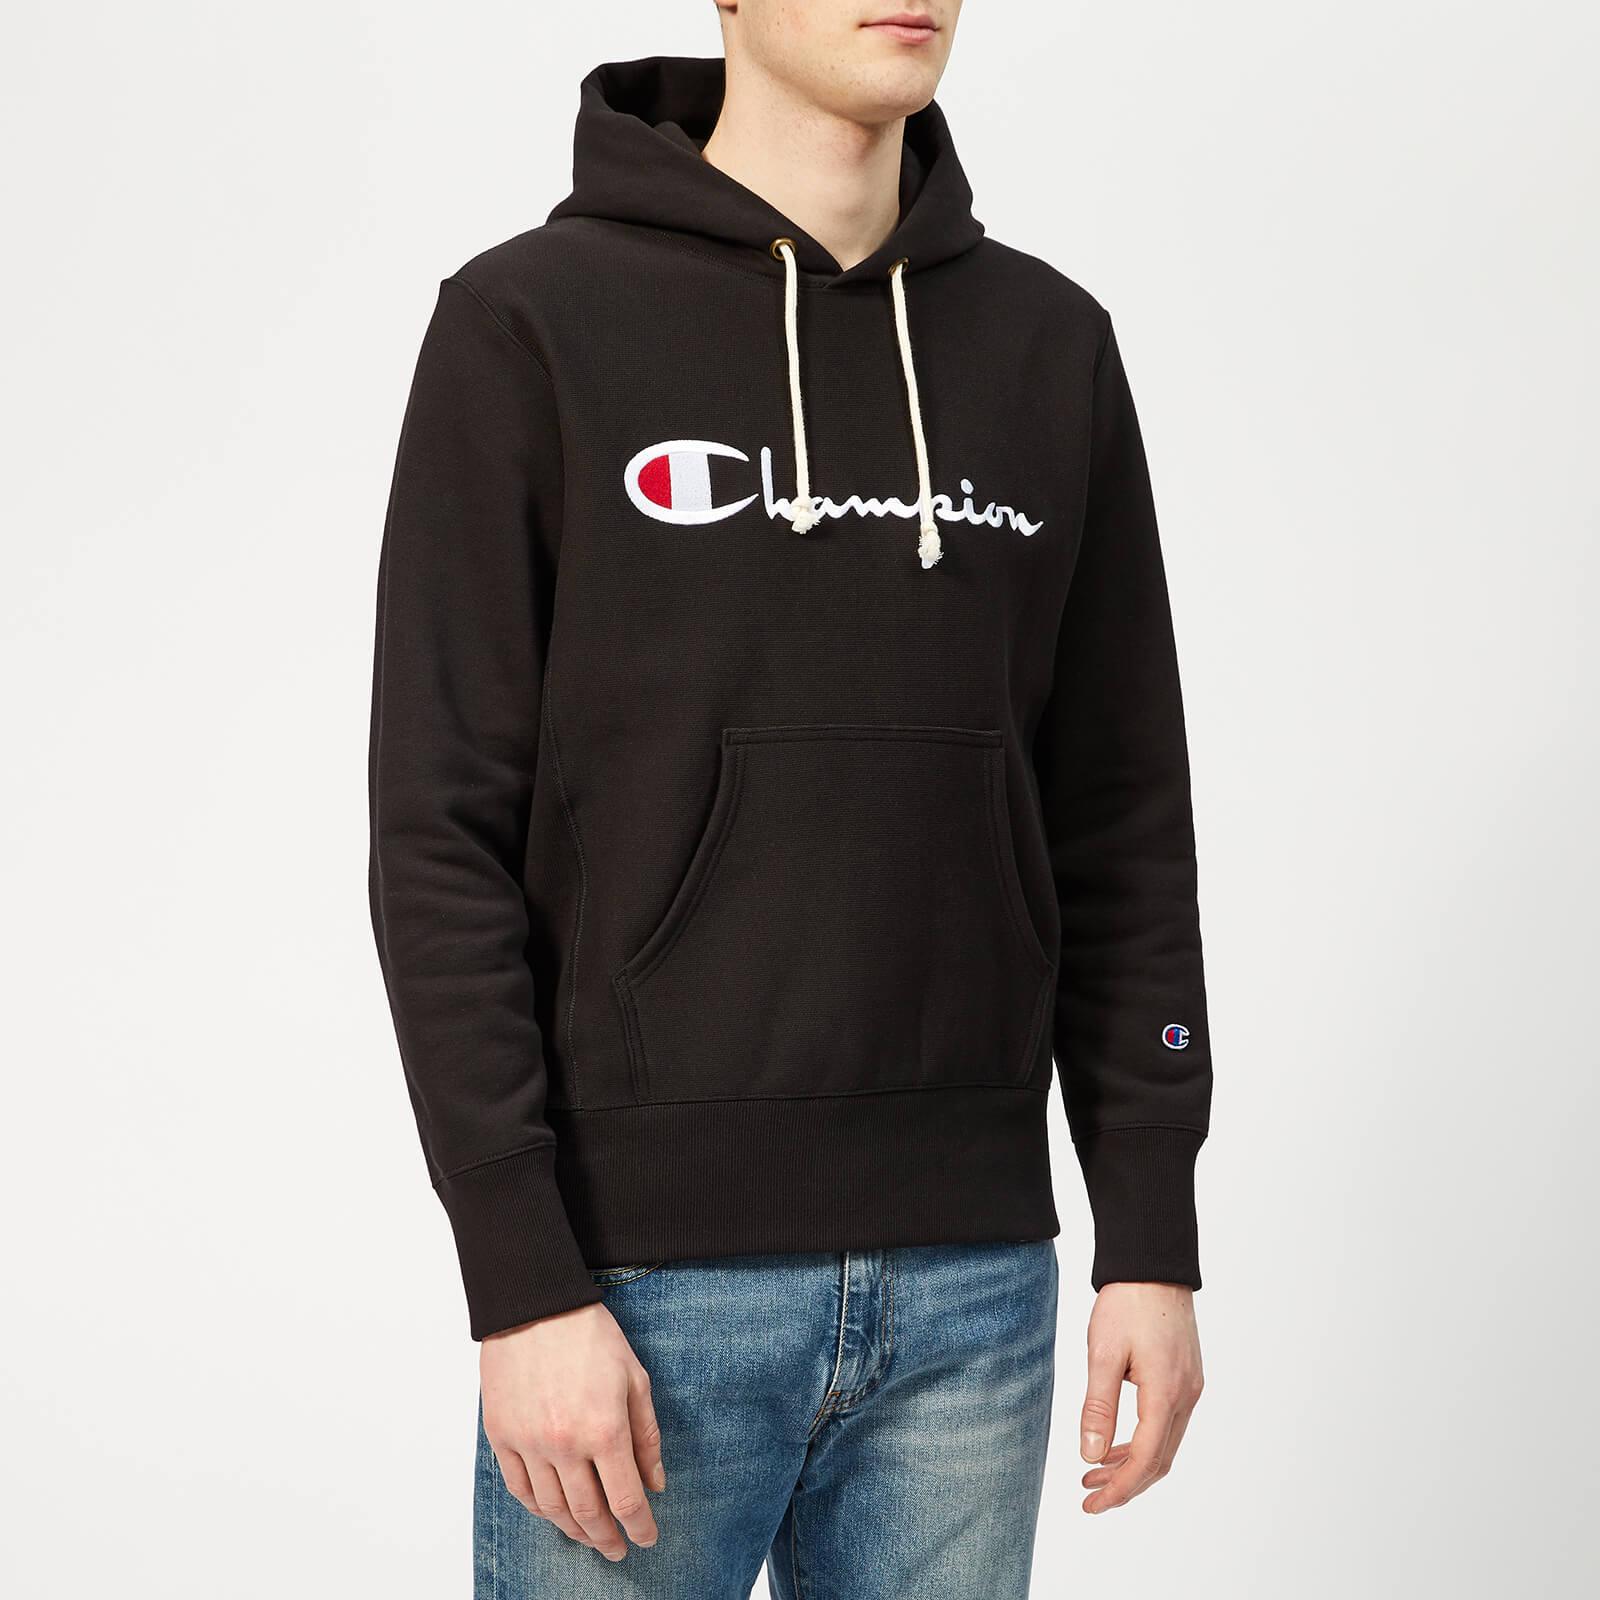 Champion Cotton Script Overhead Hoodie in Black for Men - Save 40% - Lyst